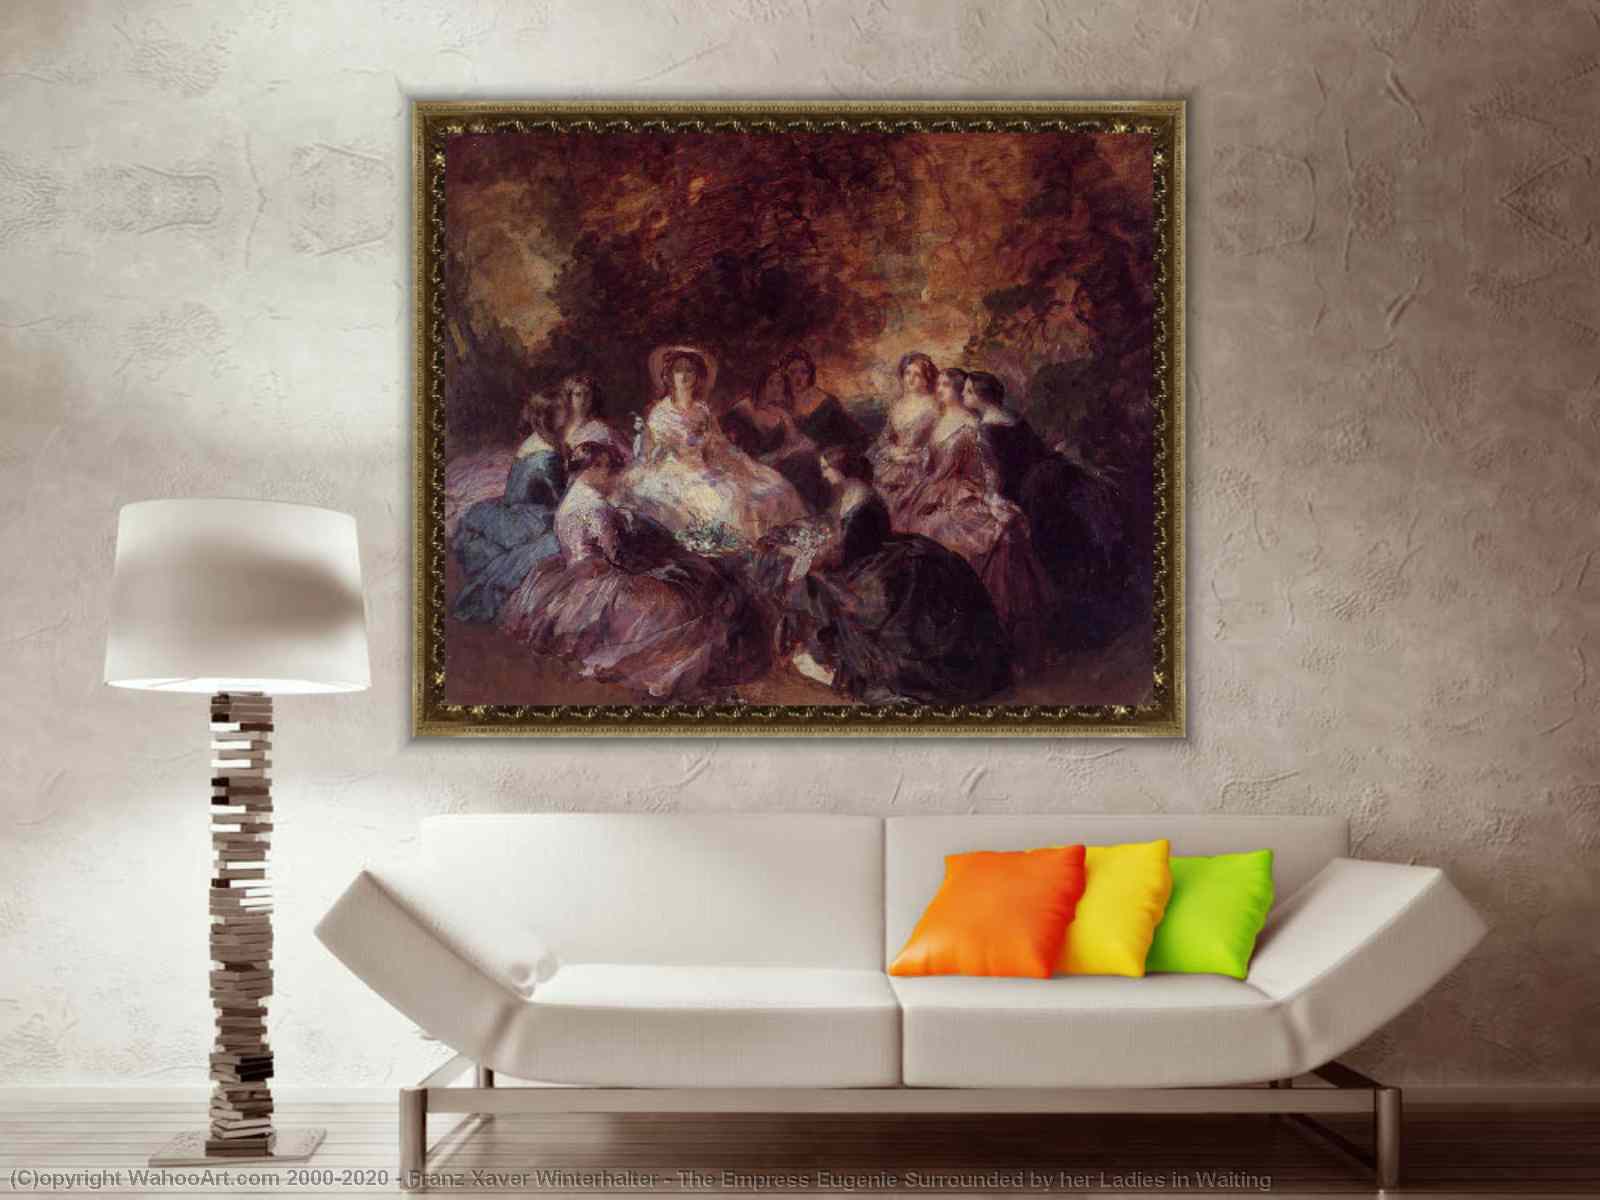  The Empress EugéNie De Montijo Surrounded By Her Ladies In  Waiting By Franz Xaver Winterhalter Canvas Painting Posters And Prints Wall  Art Pictures for Living Room Bedroom Decor 08x12inch(20x30cm) Un: Posters